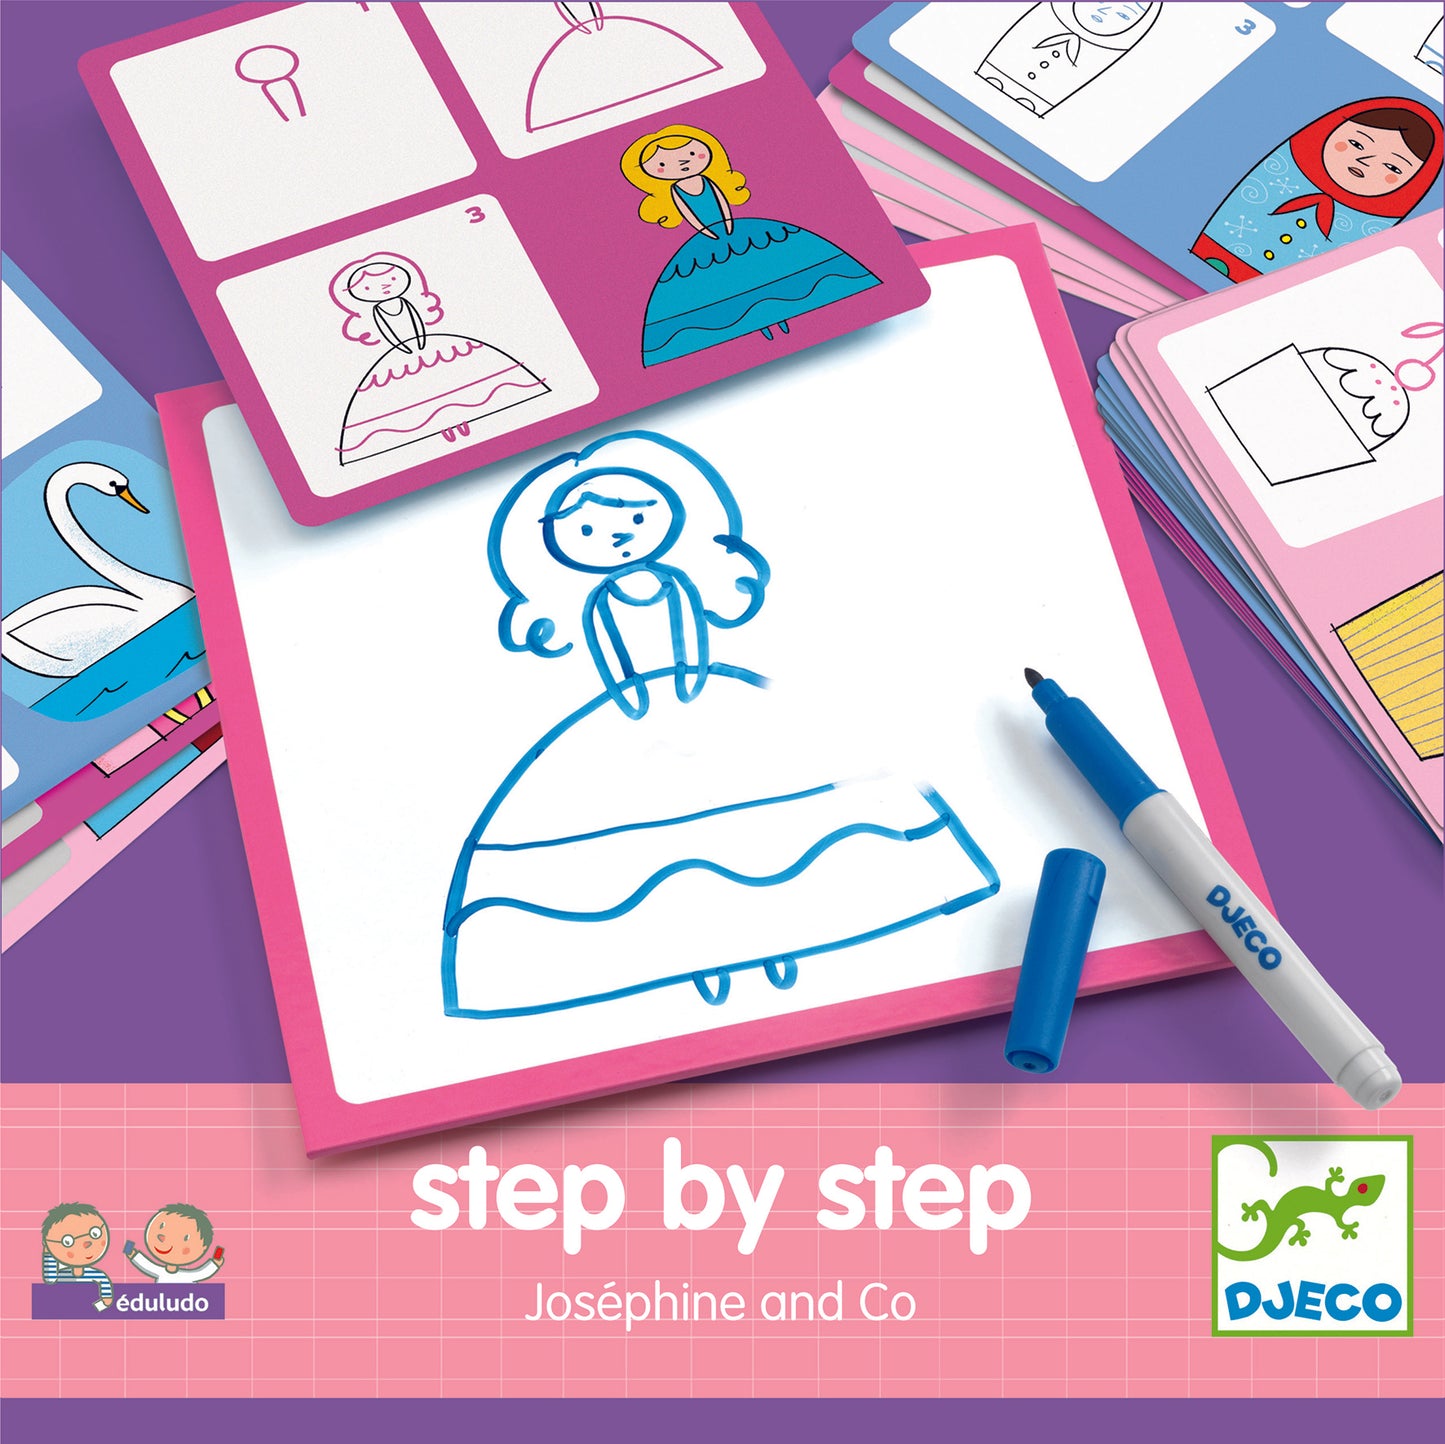 Djeco Josephine and Co Step by step how to draw